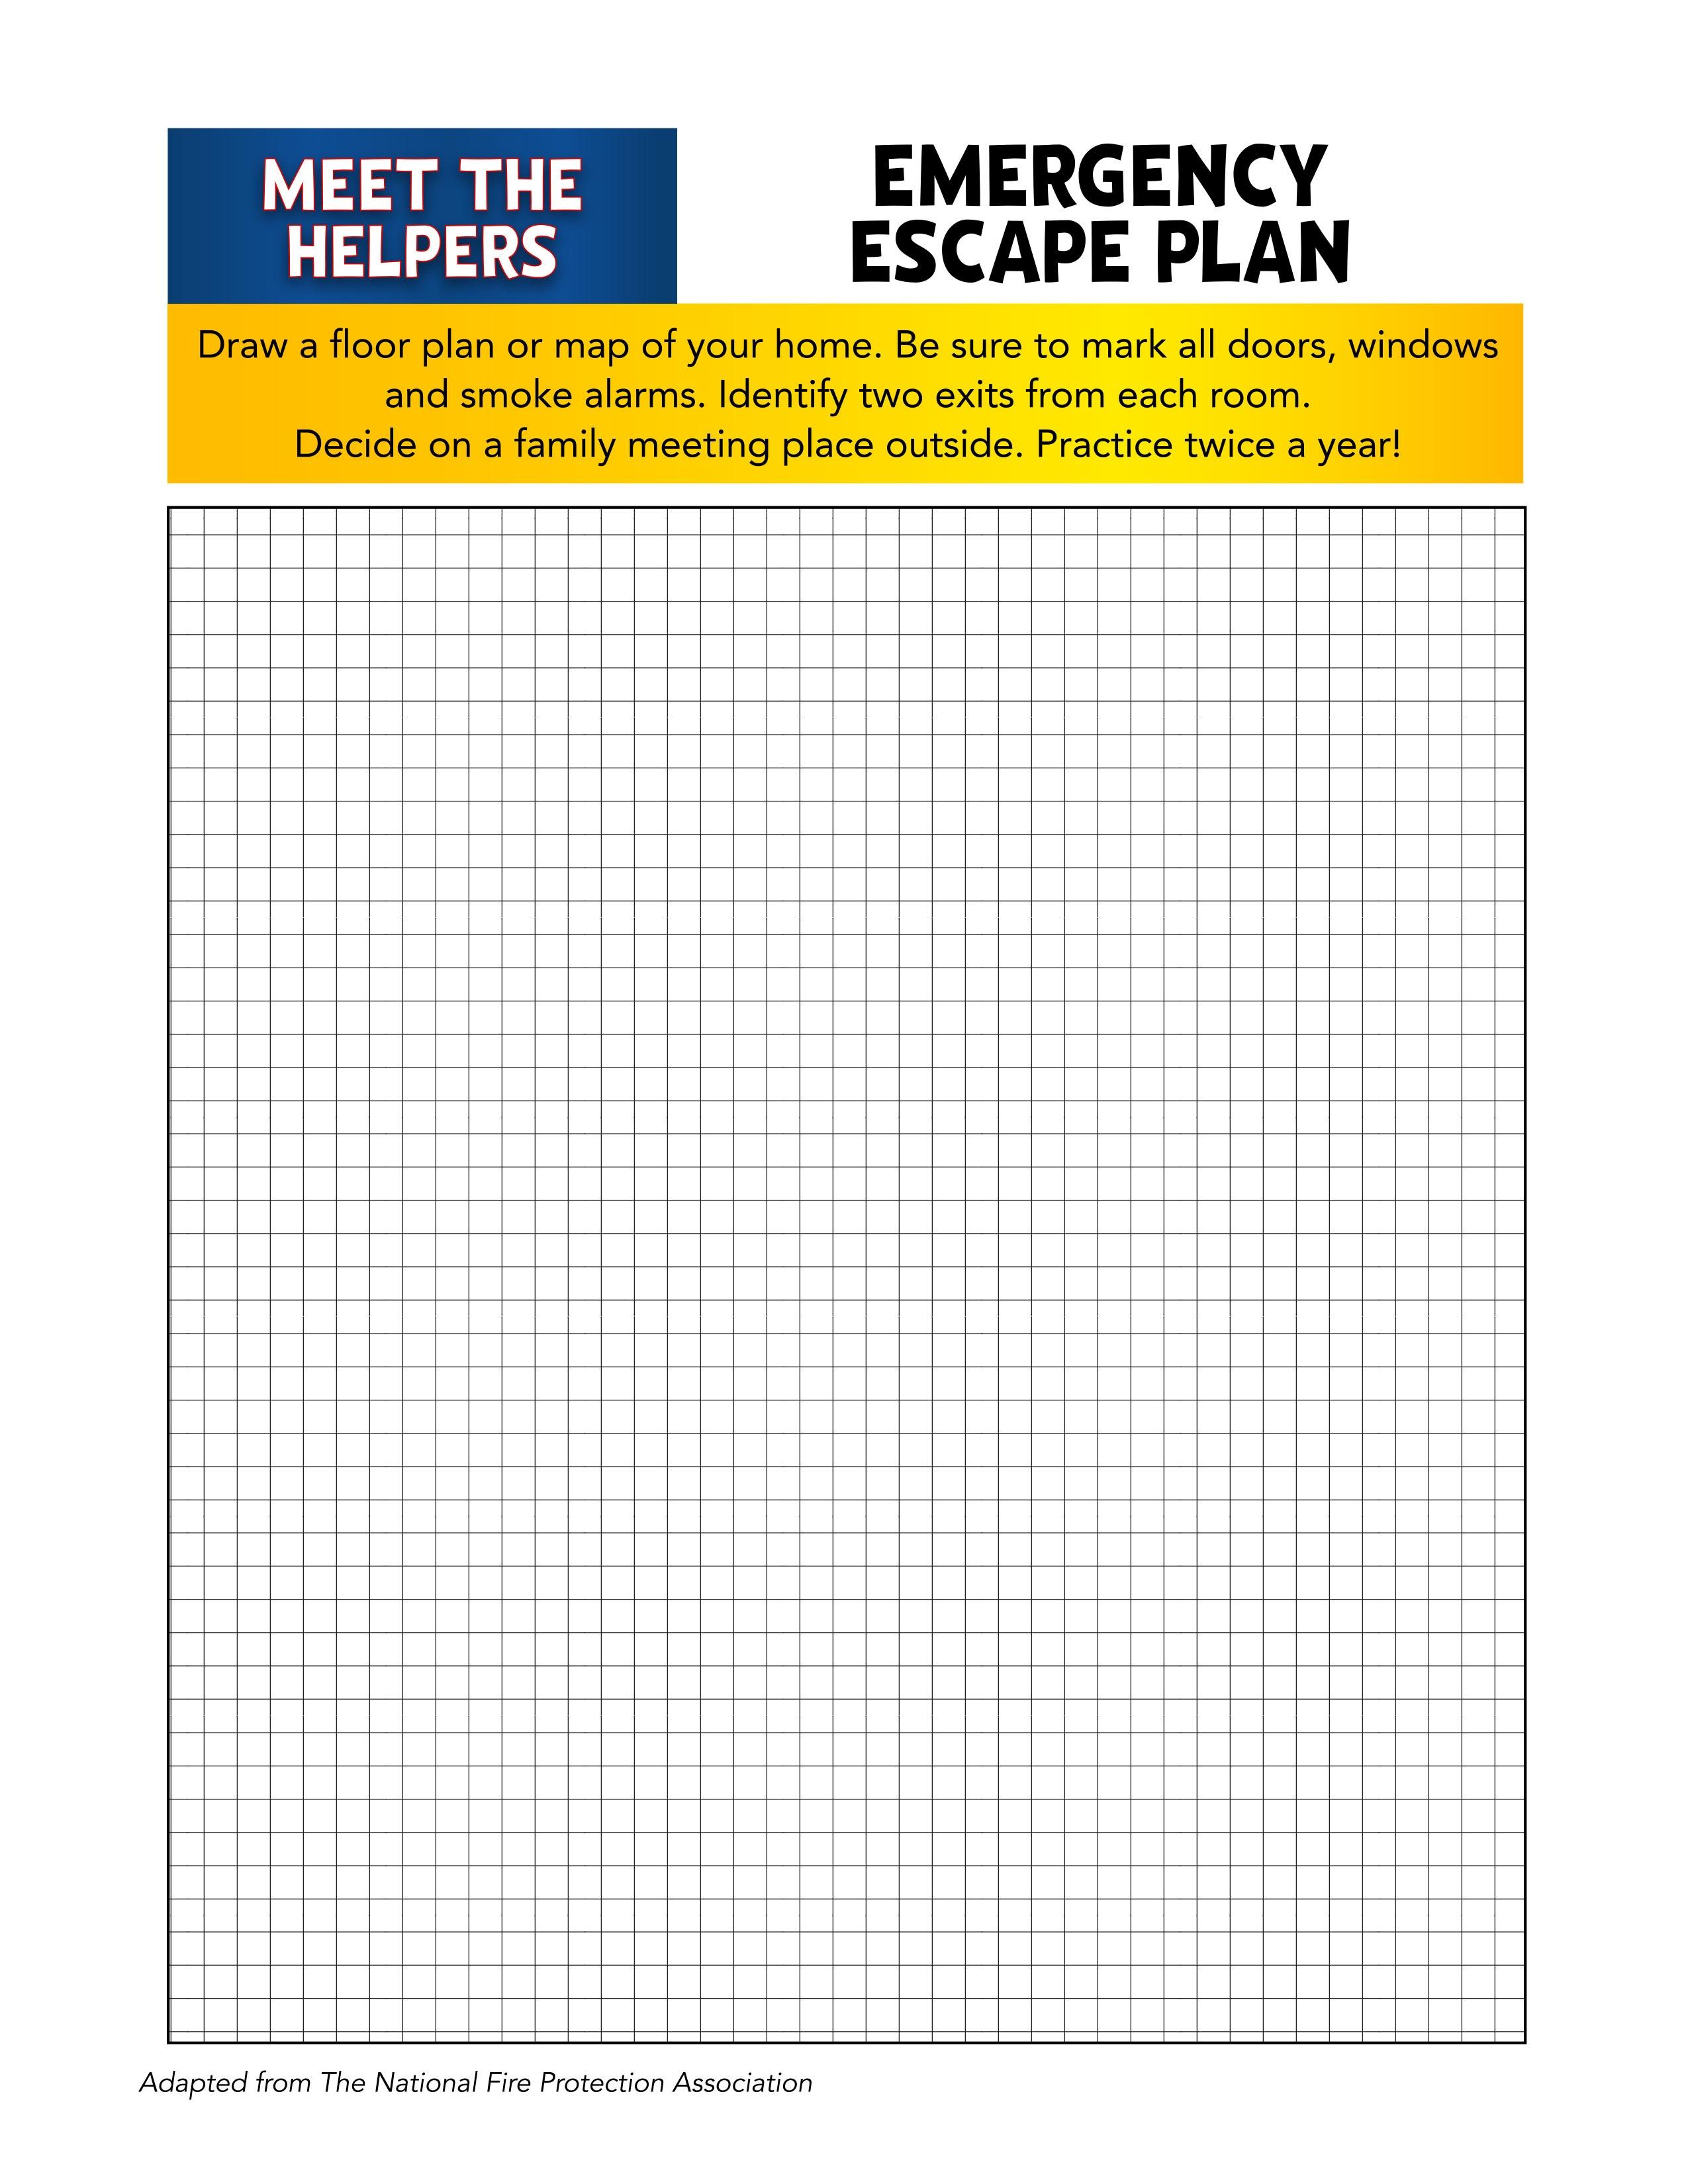 family emergency plan template